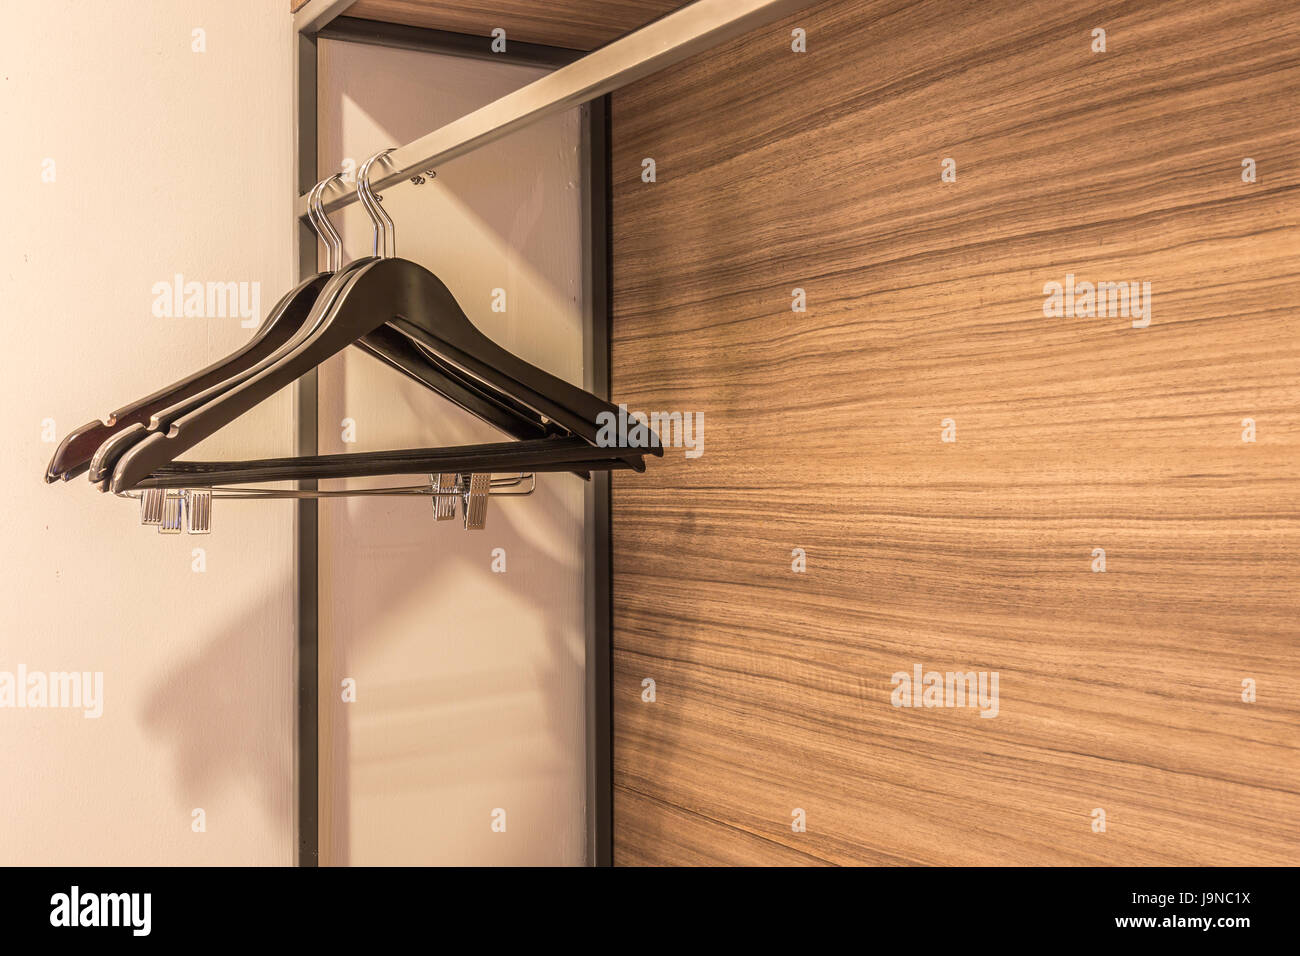 clothes hanger in the wardrobe with warm light Stock Photo